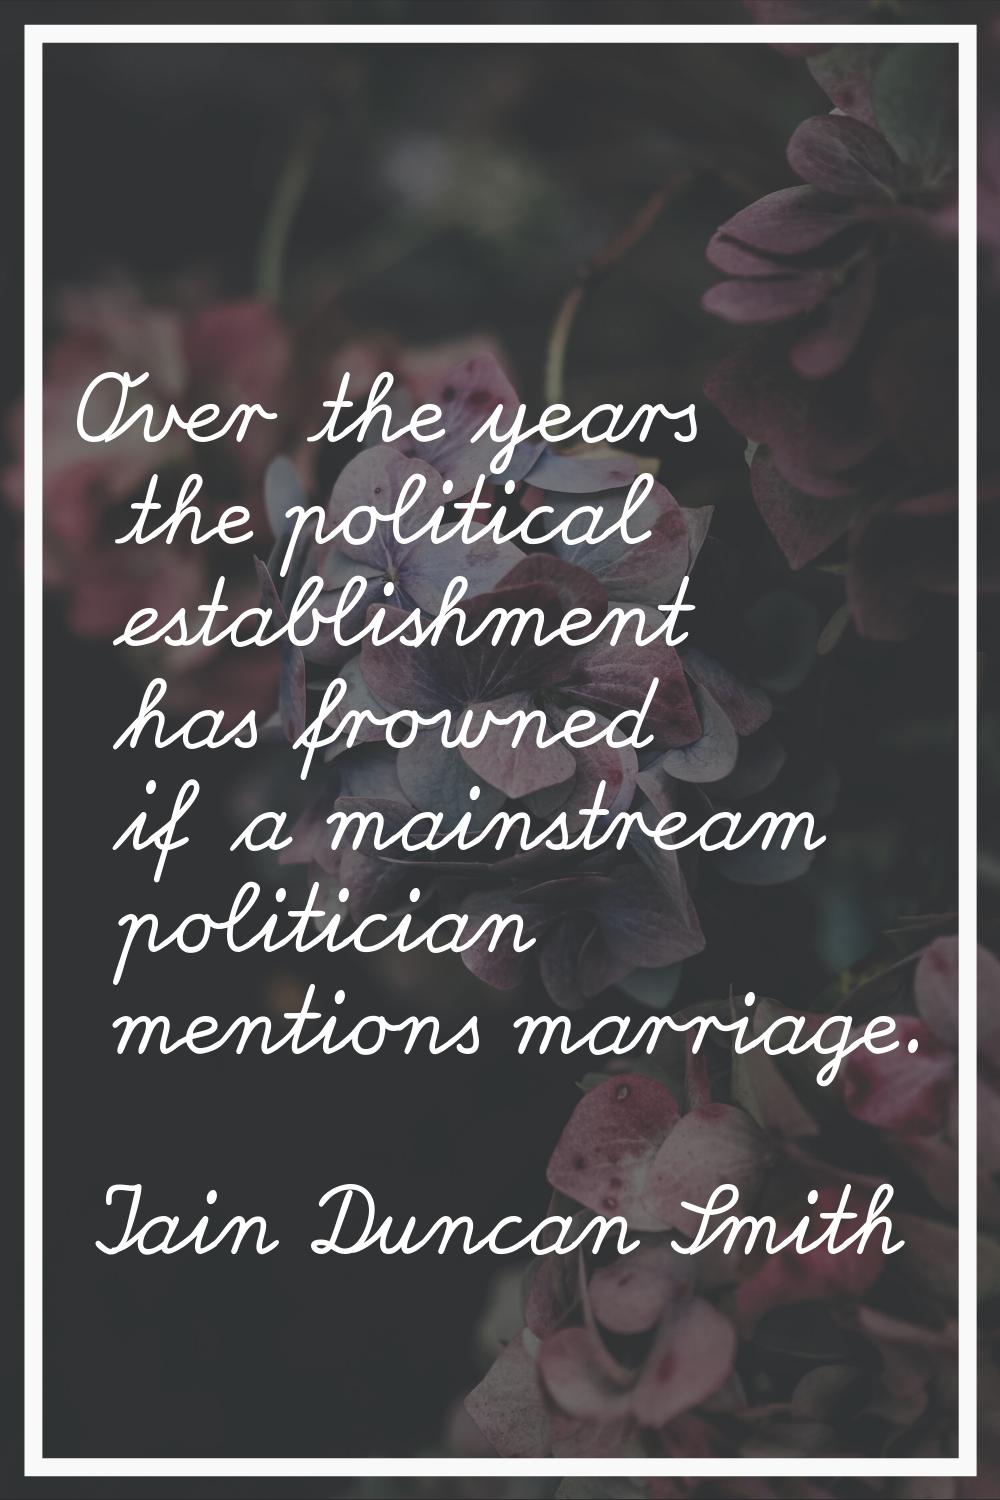 Over the years the political establishment has frowned if a mainstream politician mentions marriage